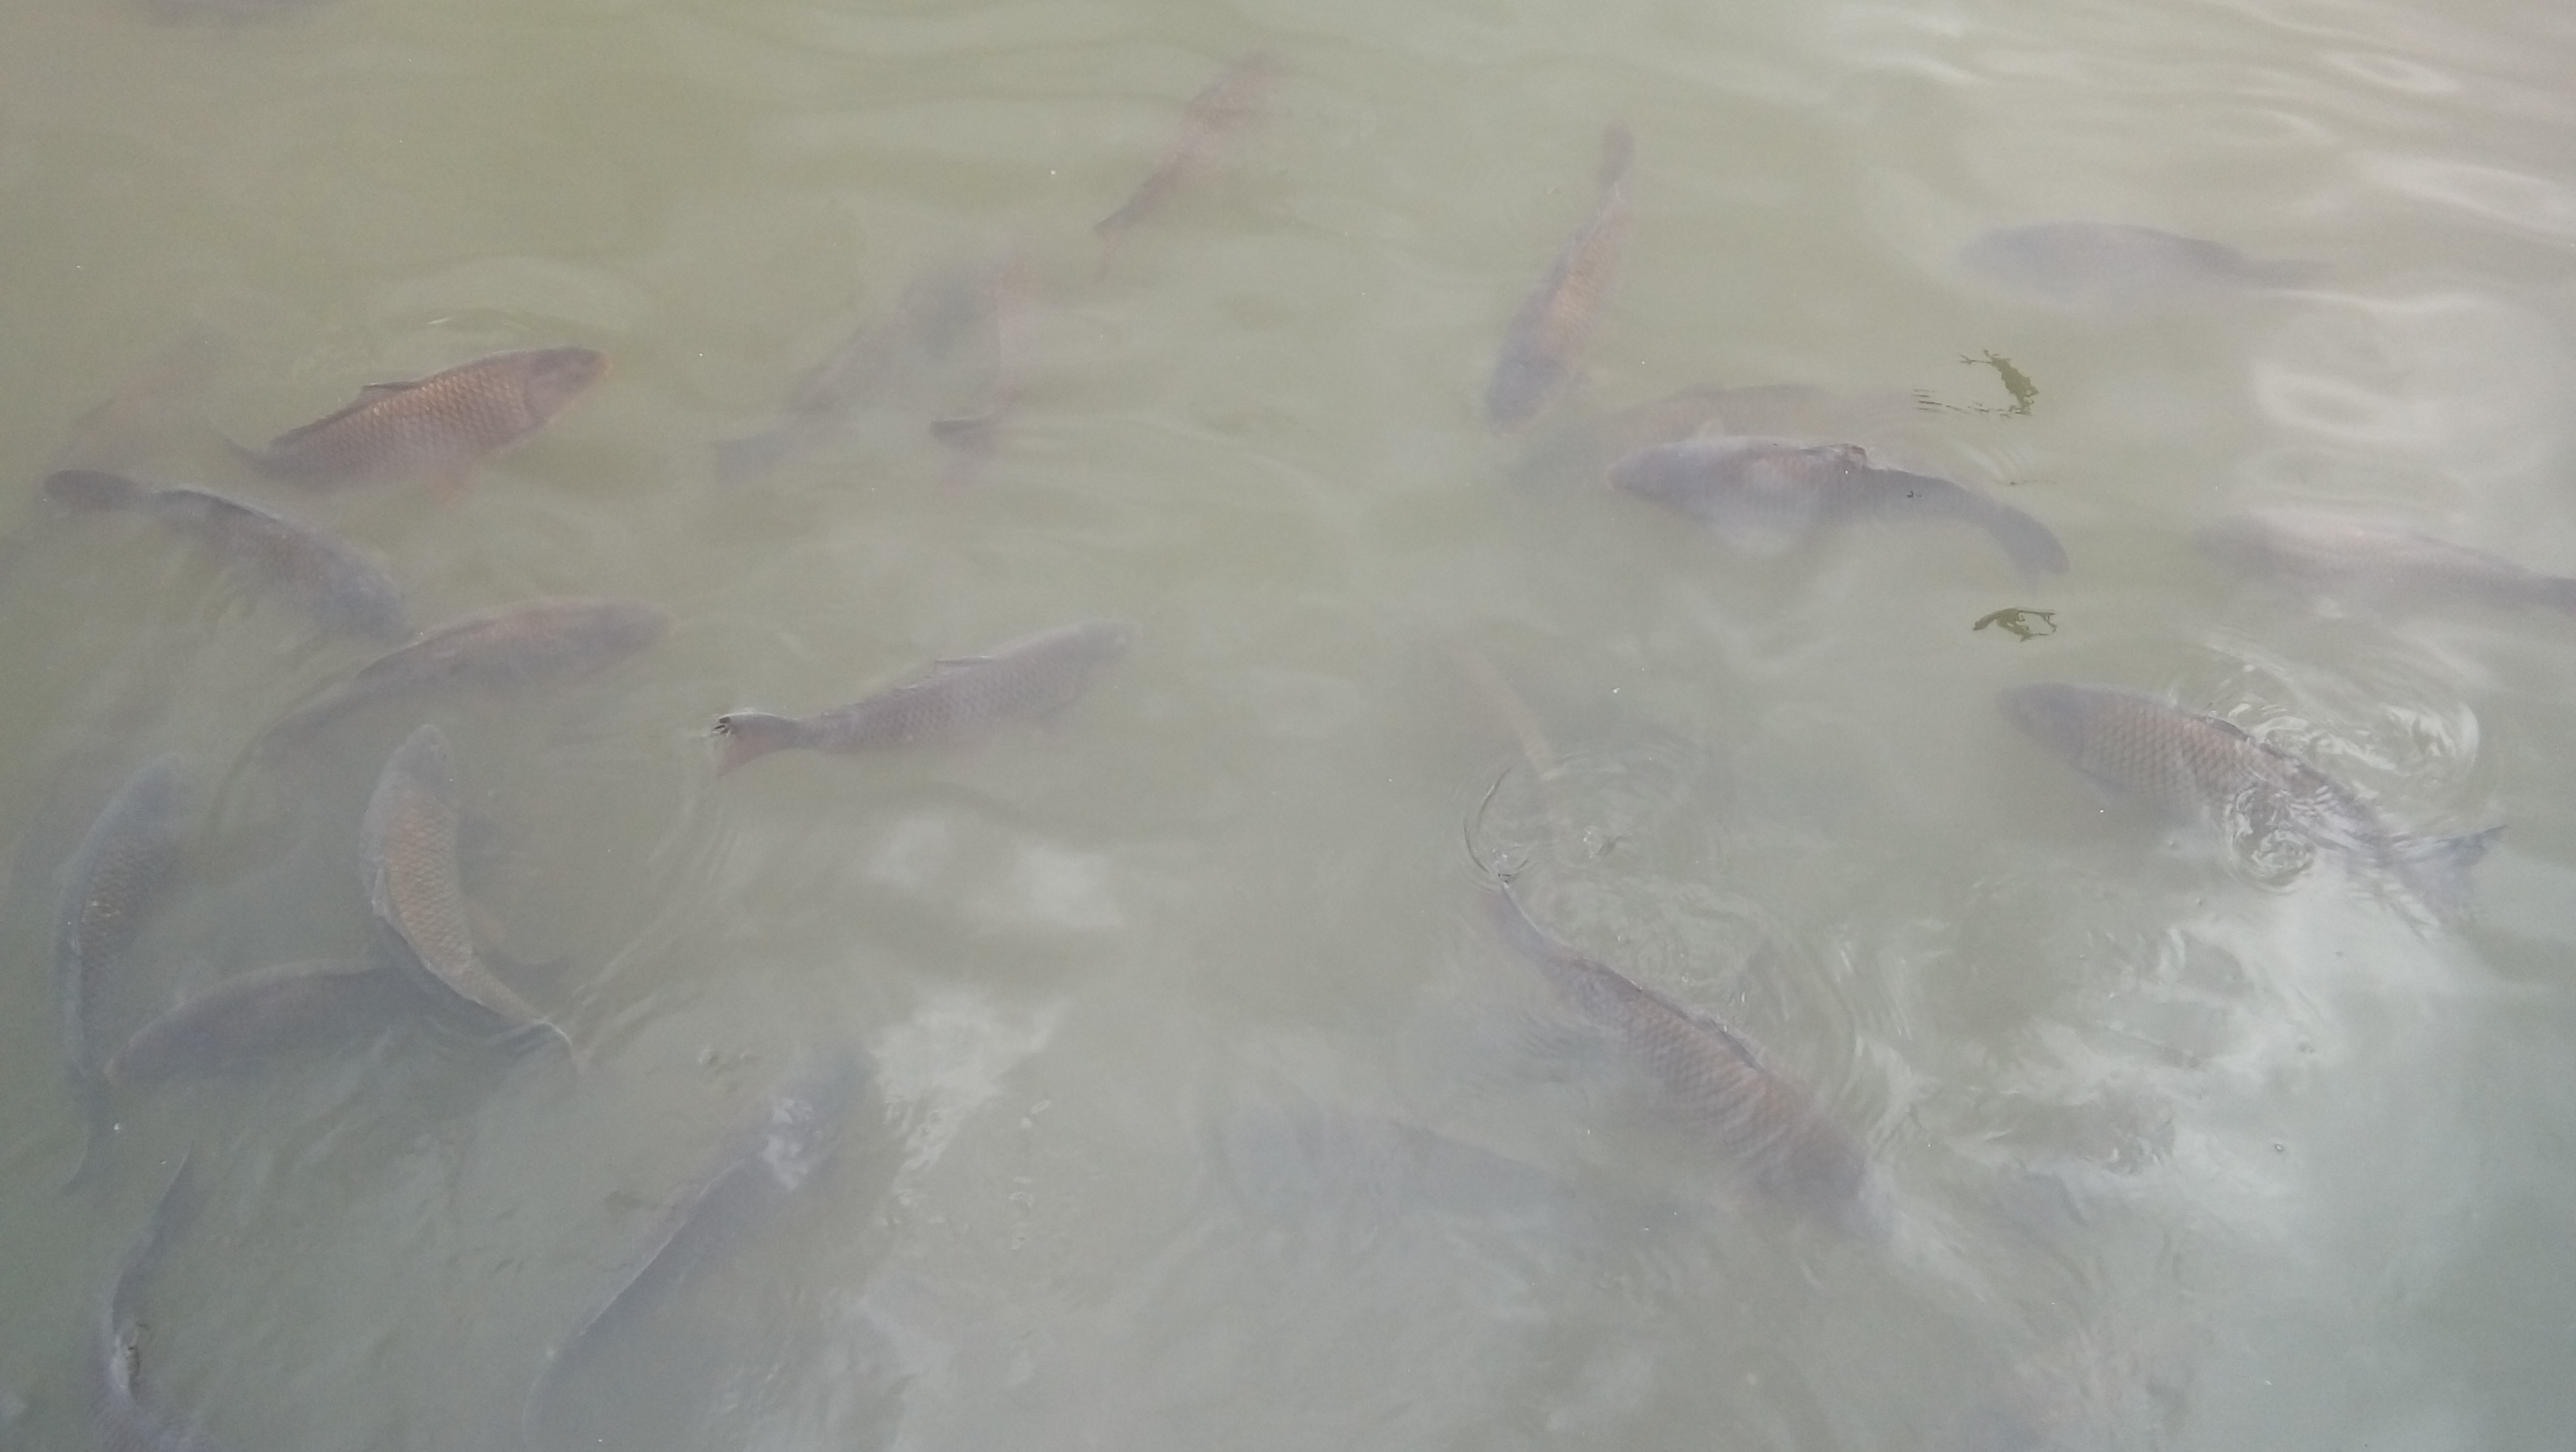 A shoal of carp on the surface of a lake